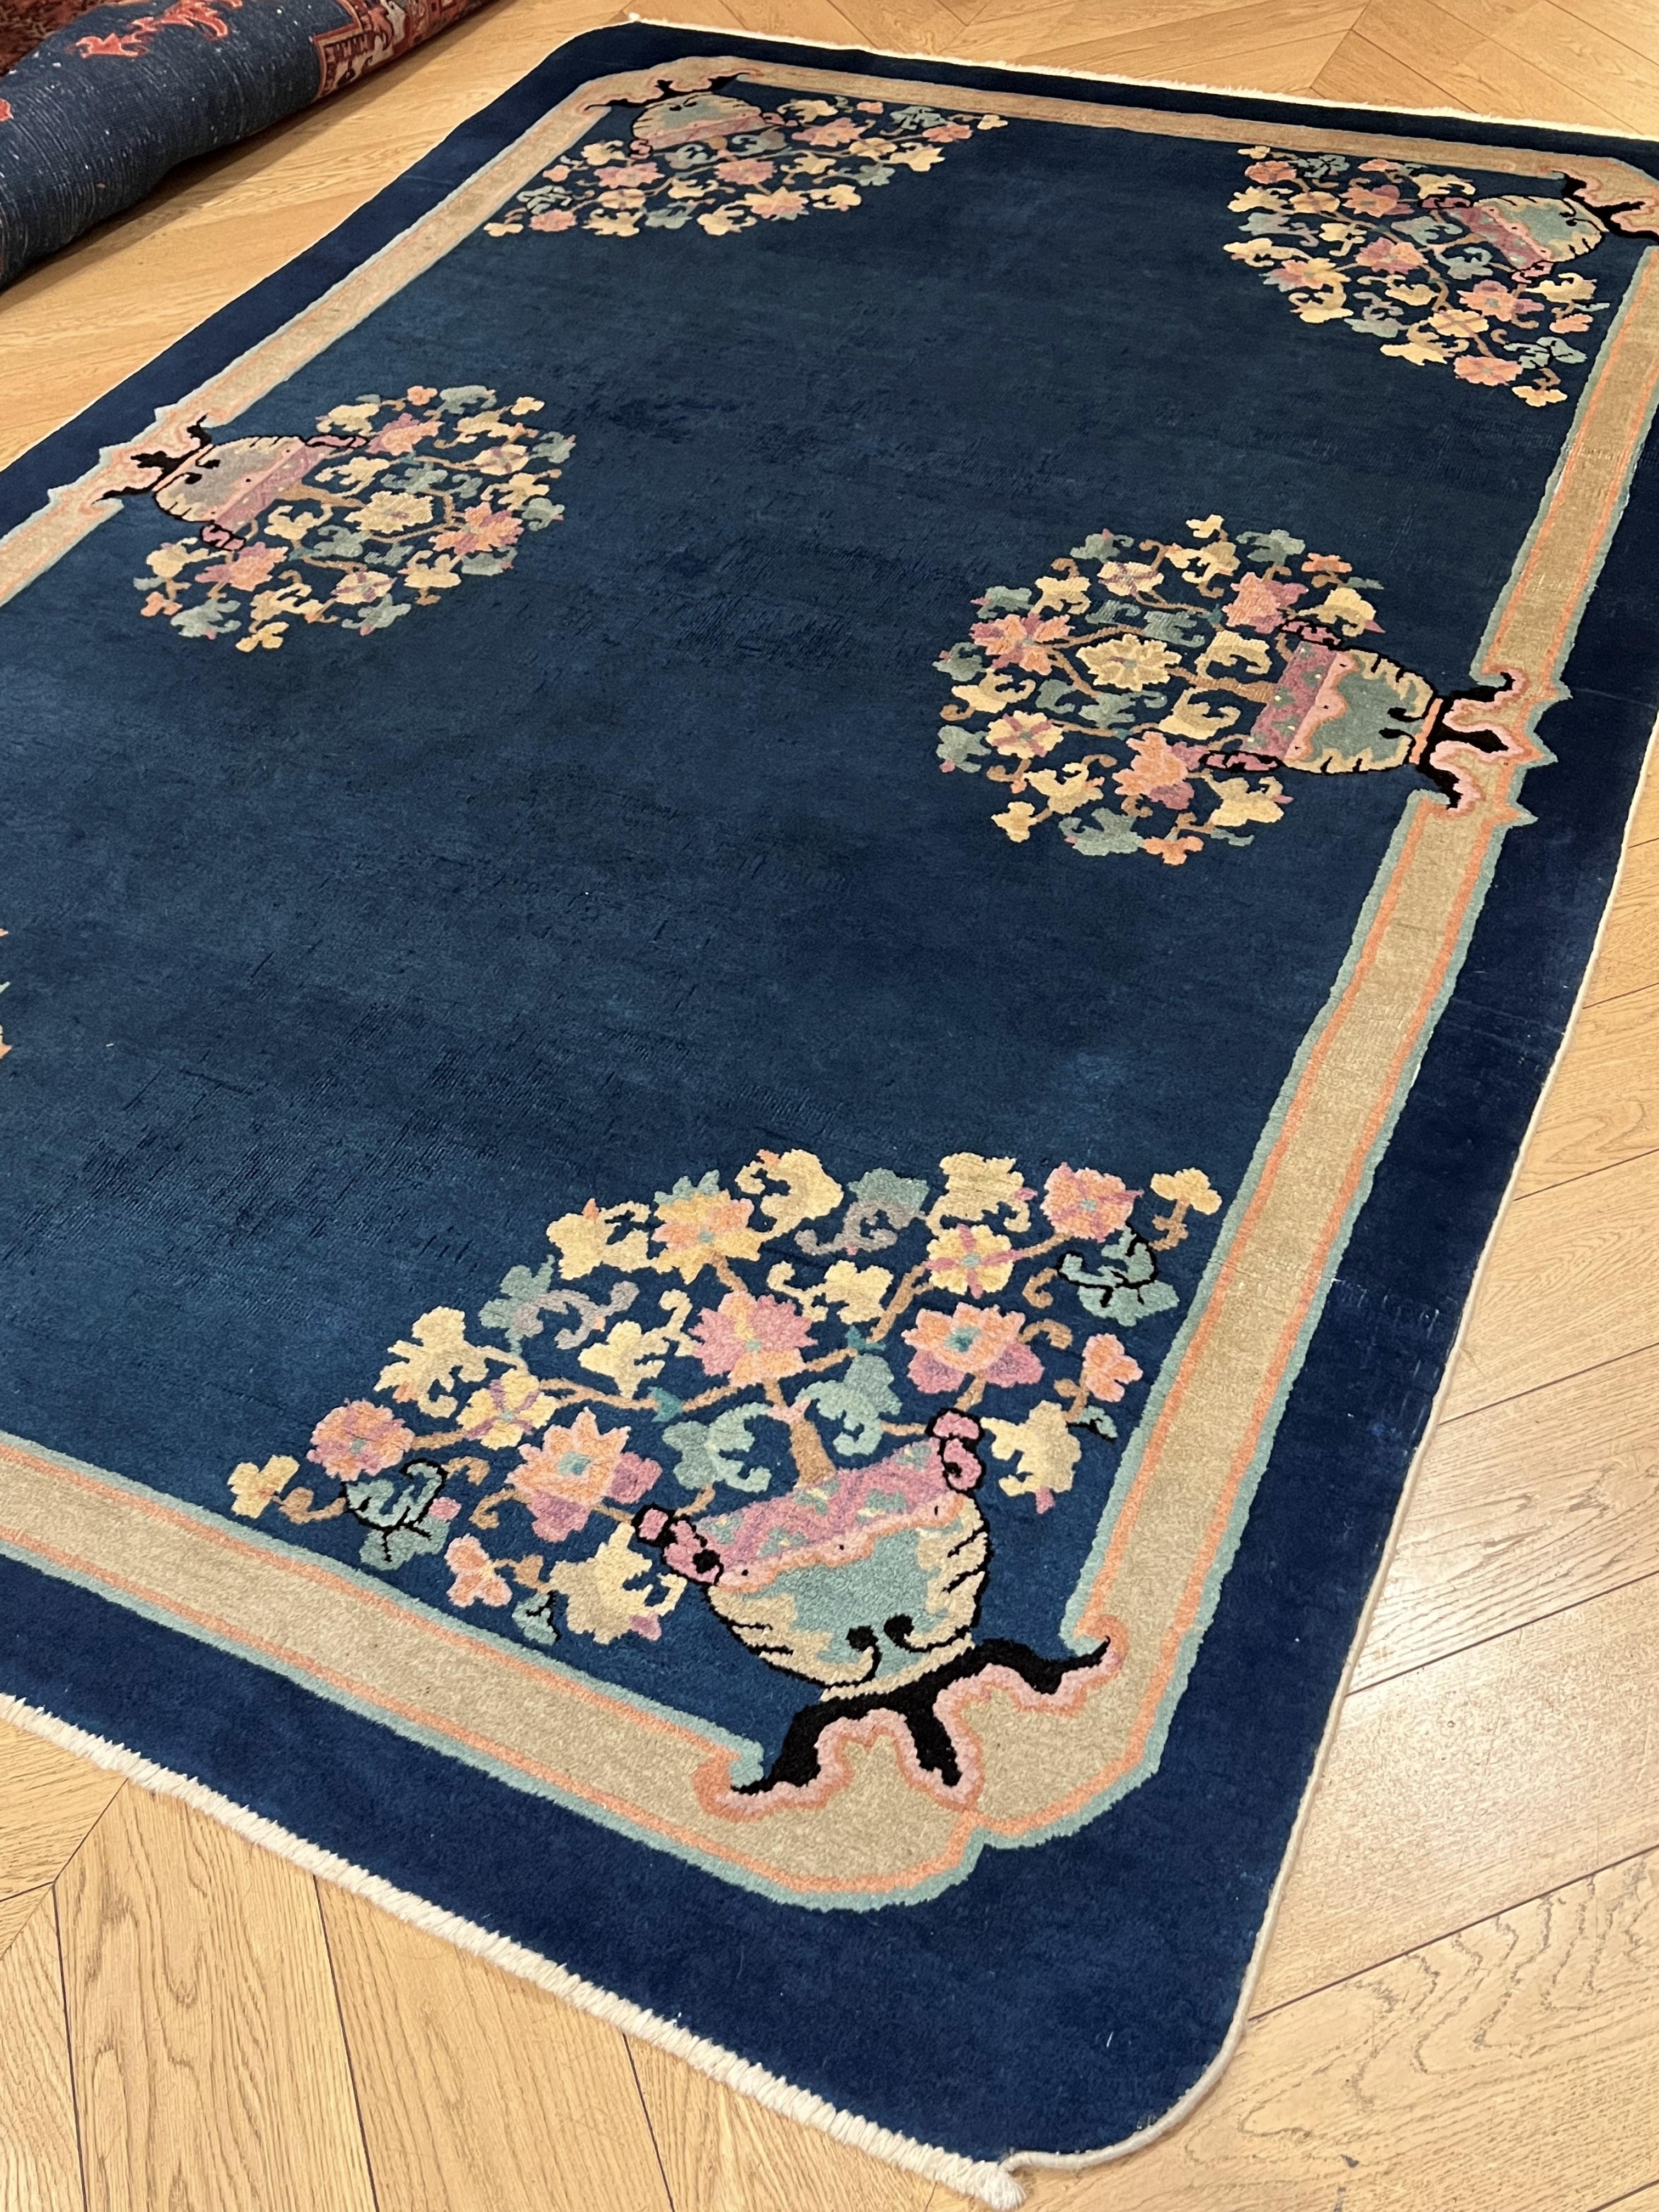 Hand-Knotted 20th Century Floreal Blue Chinese Deco Handmade Rug, ca 1920-1940